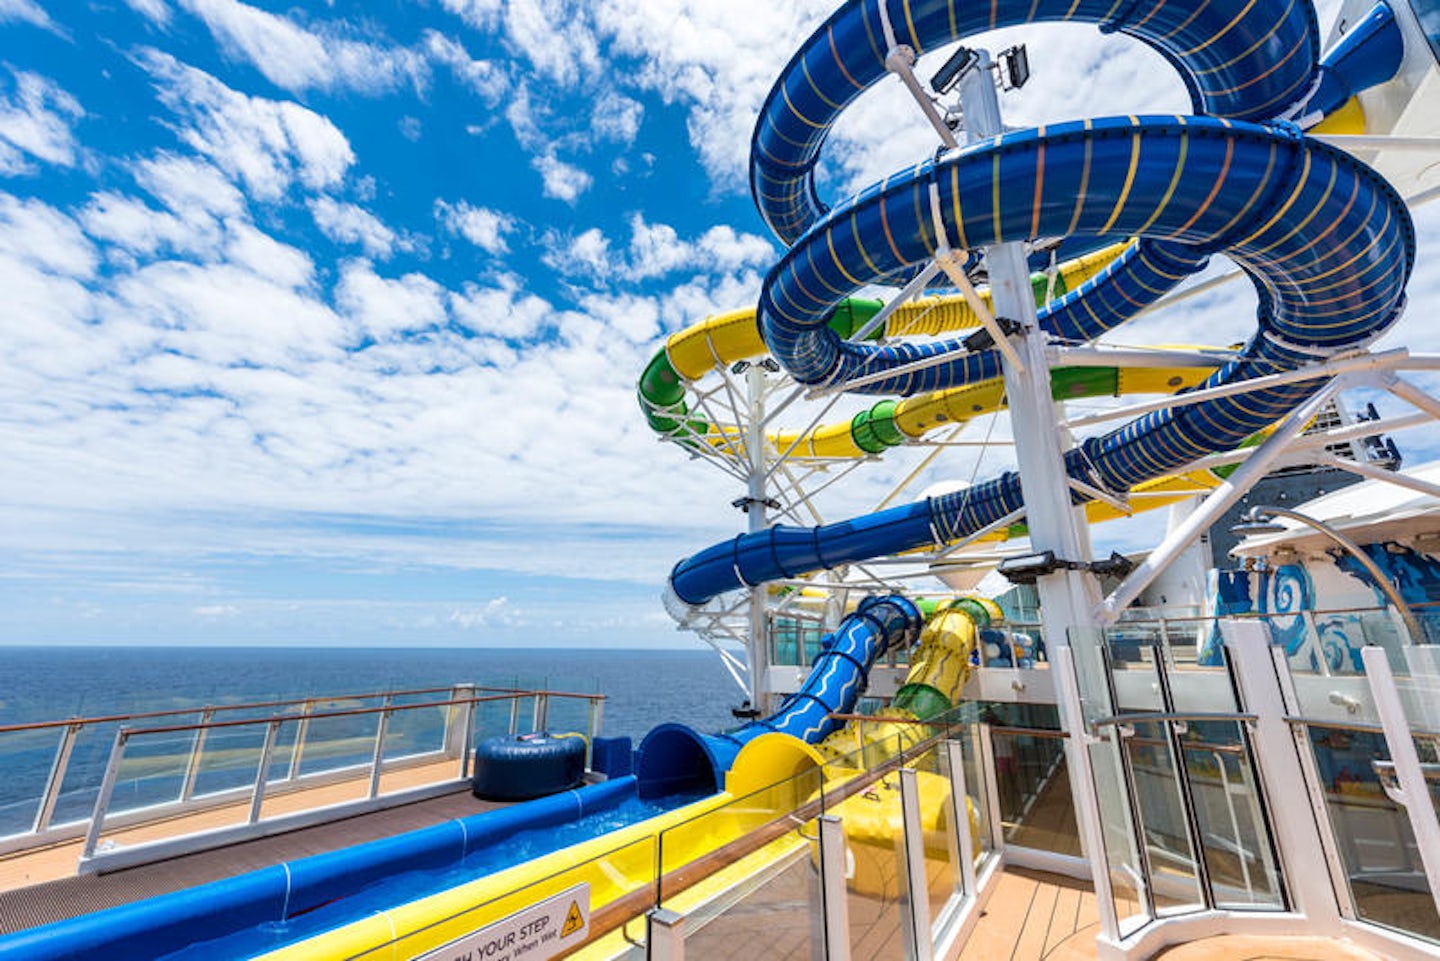 The Perfect Storm on Adventure of the Seas